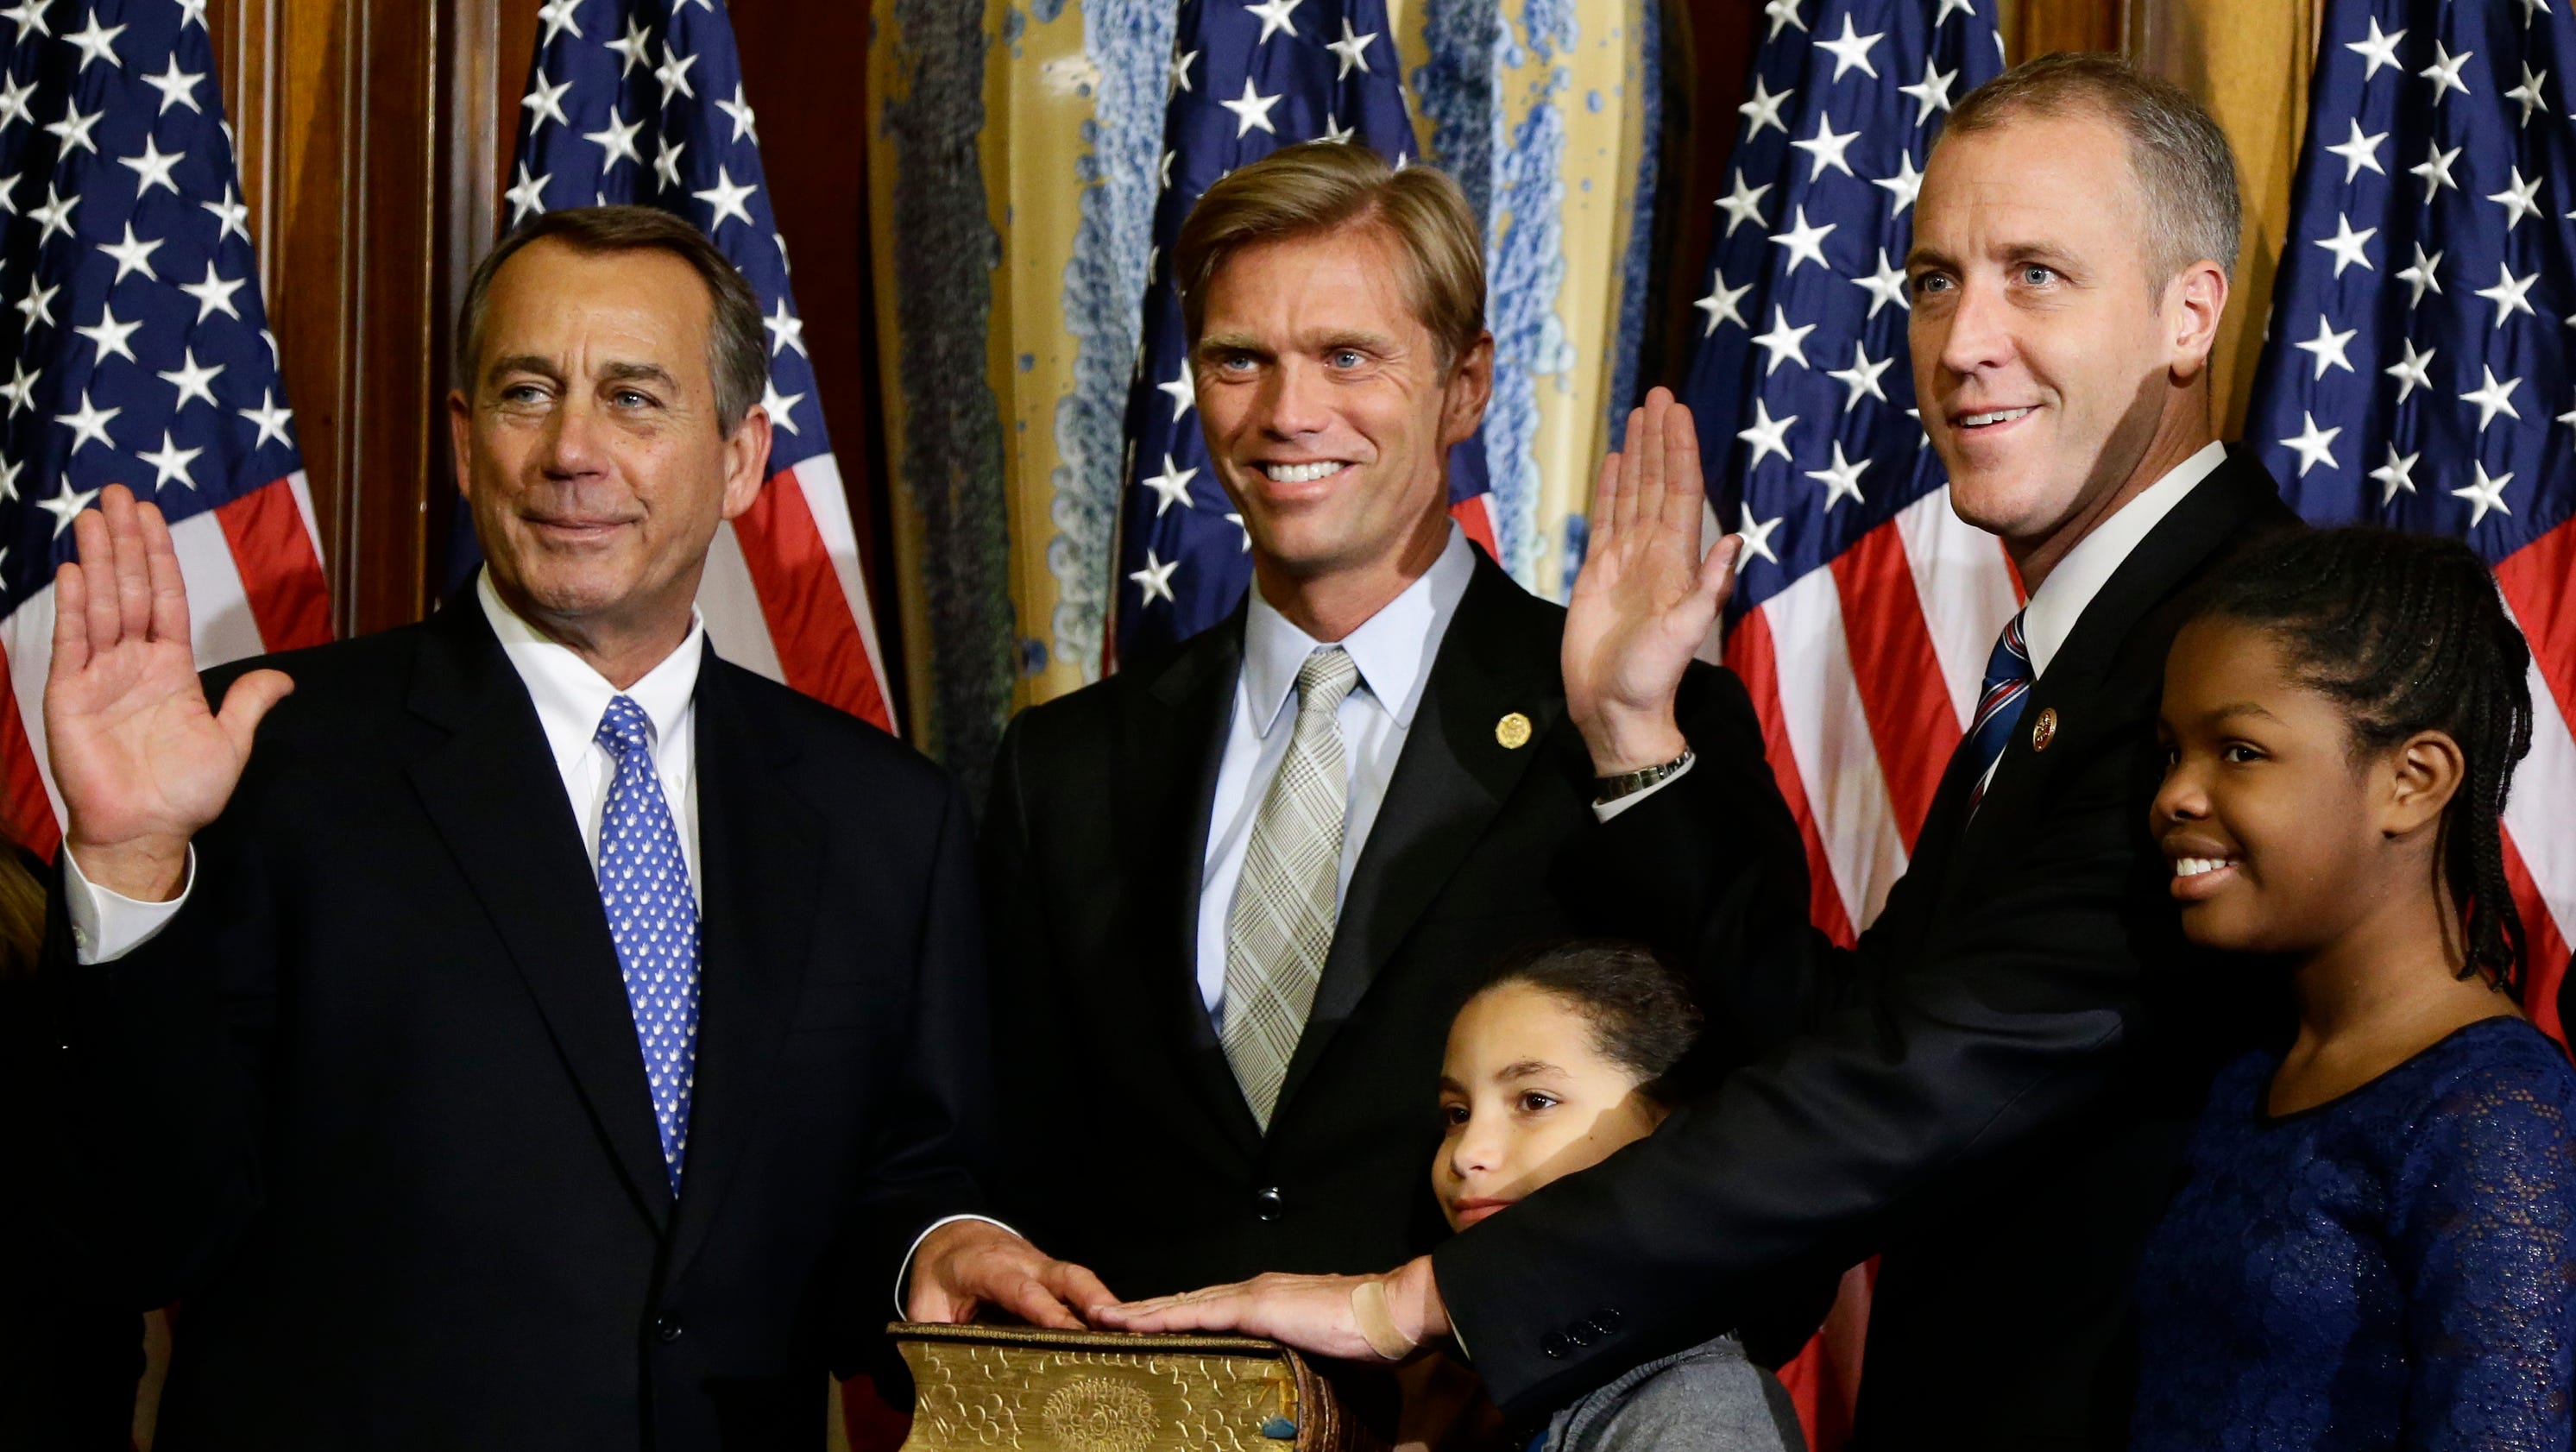 Gay congressman from New York to marry partner3200 x 1680